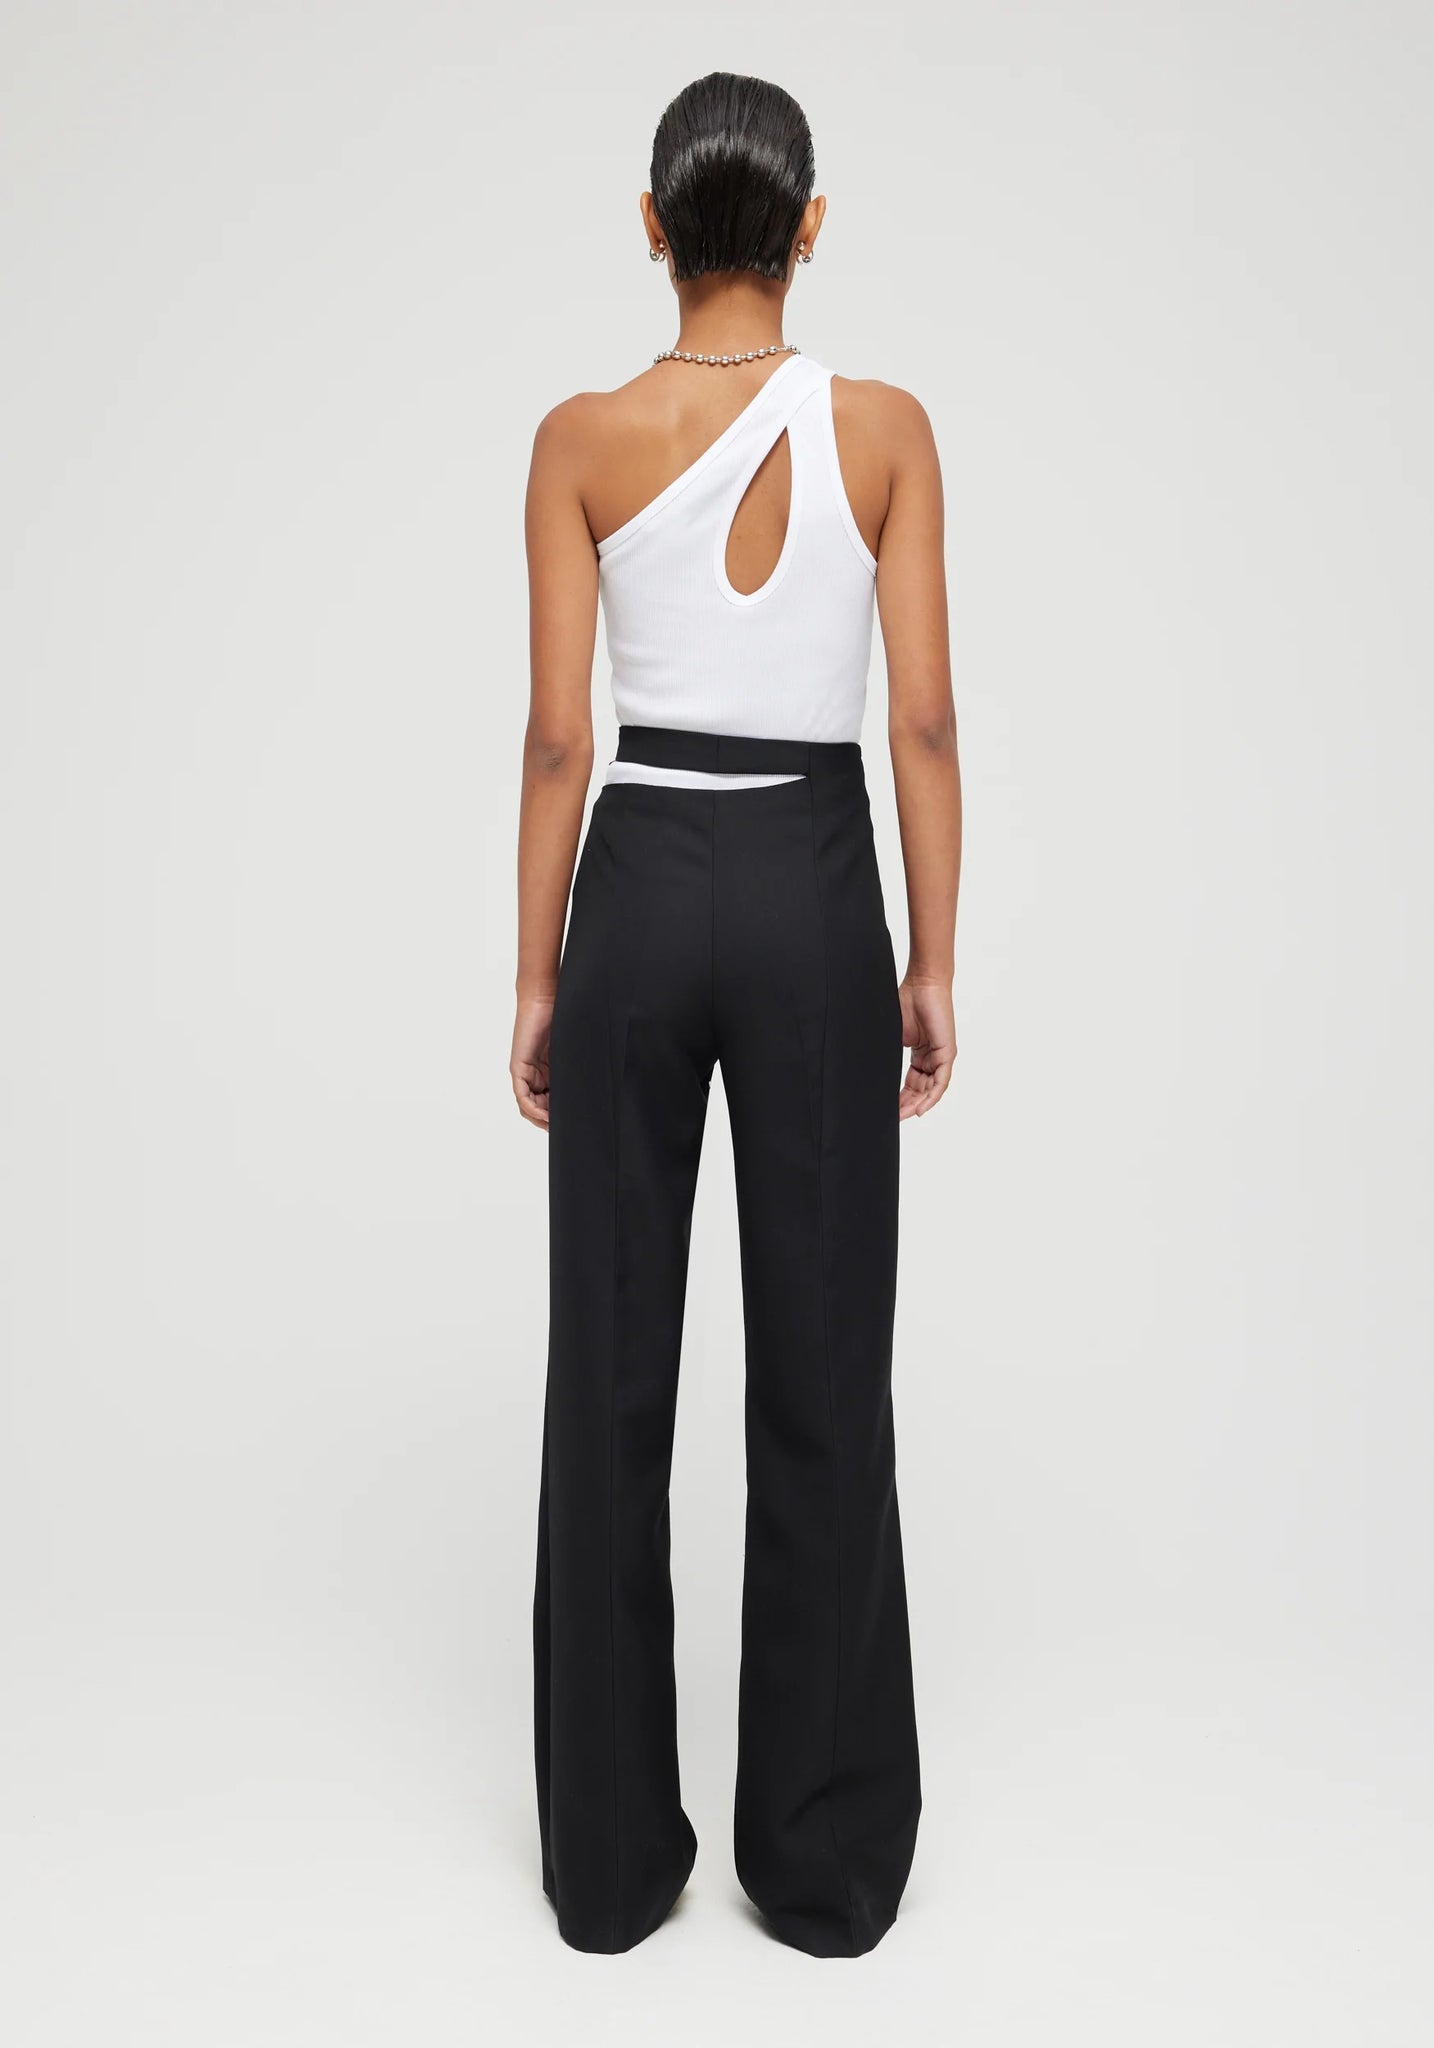 RÓHE CUT OUT TROUSERS